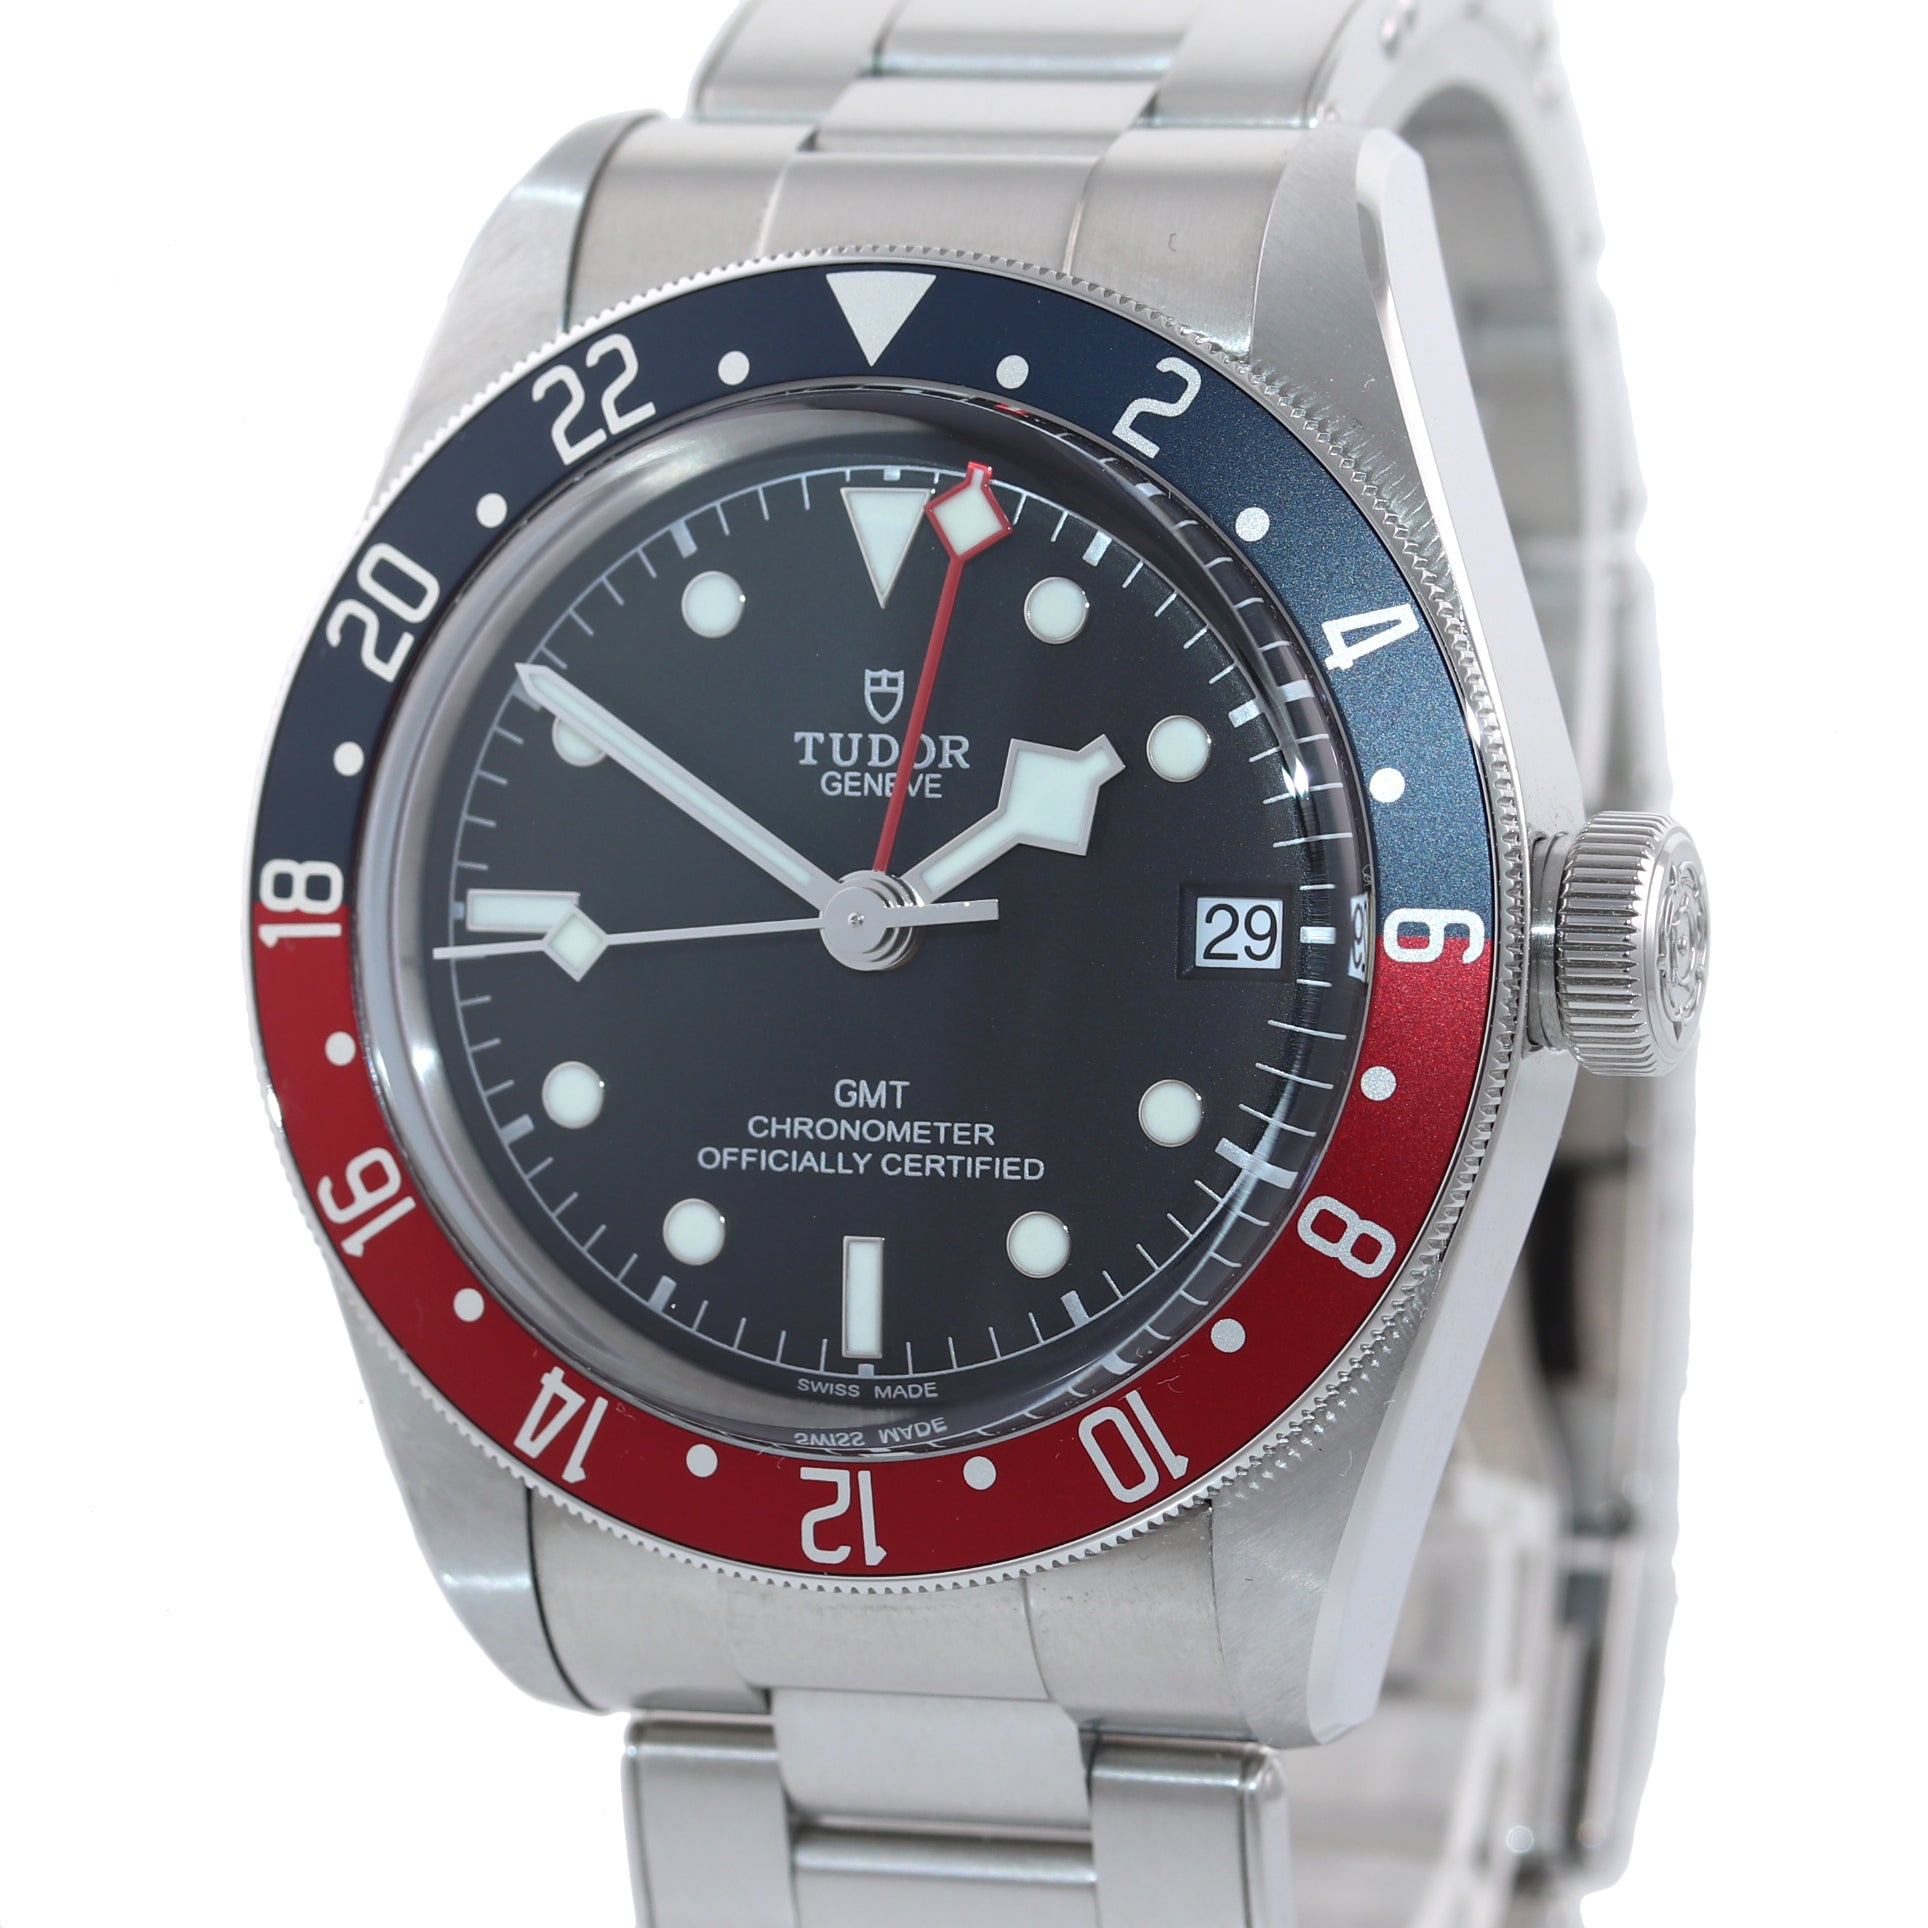 Copy of AUG 2020 NEW PAPERS Tudor Black Bay GMT Pepsi 79830RB 41mm Steel Watch Box